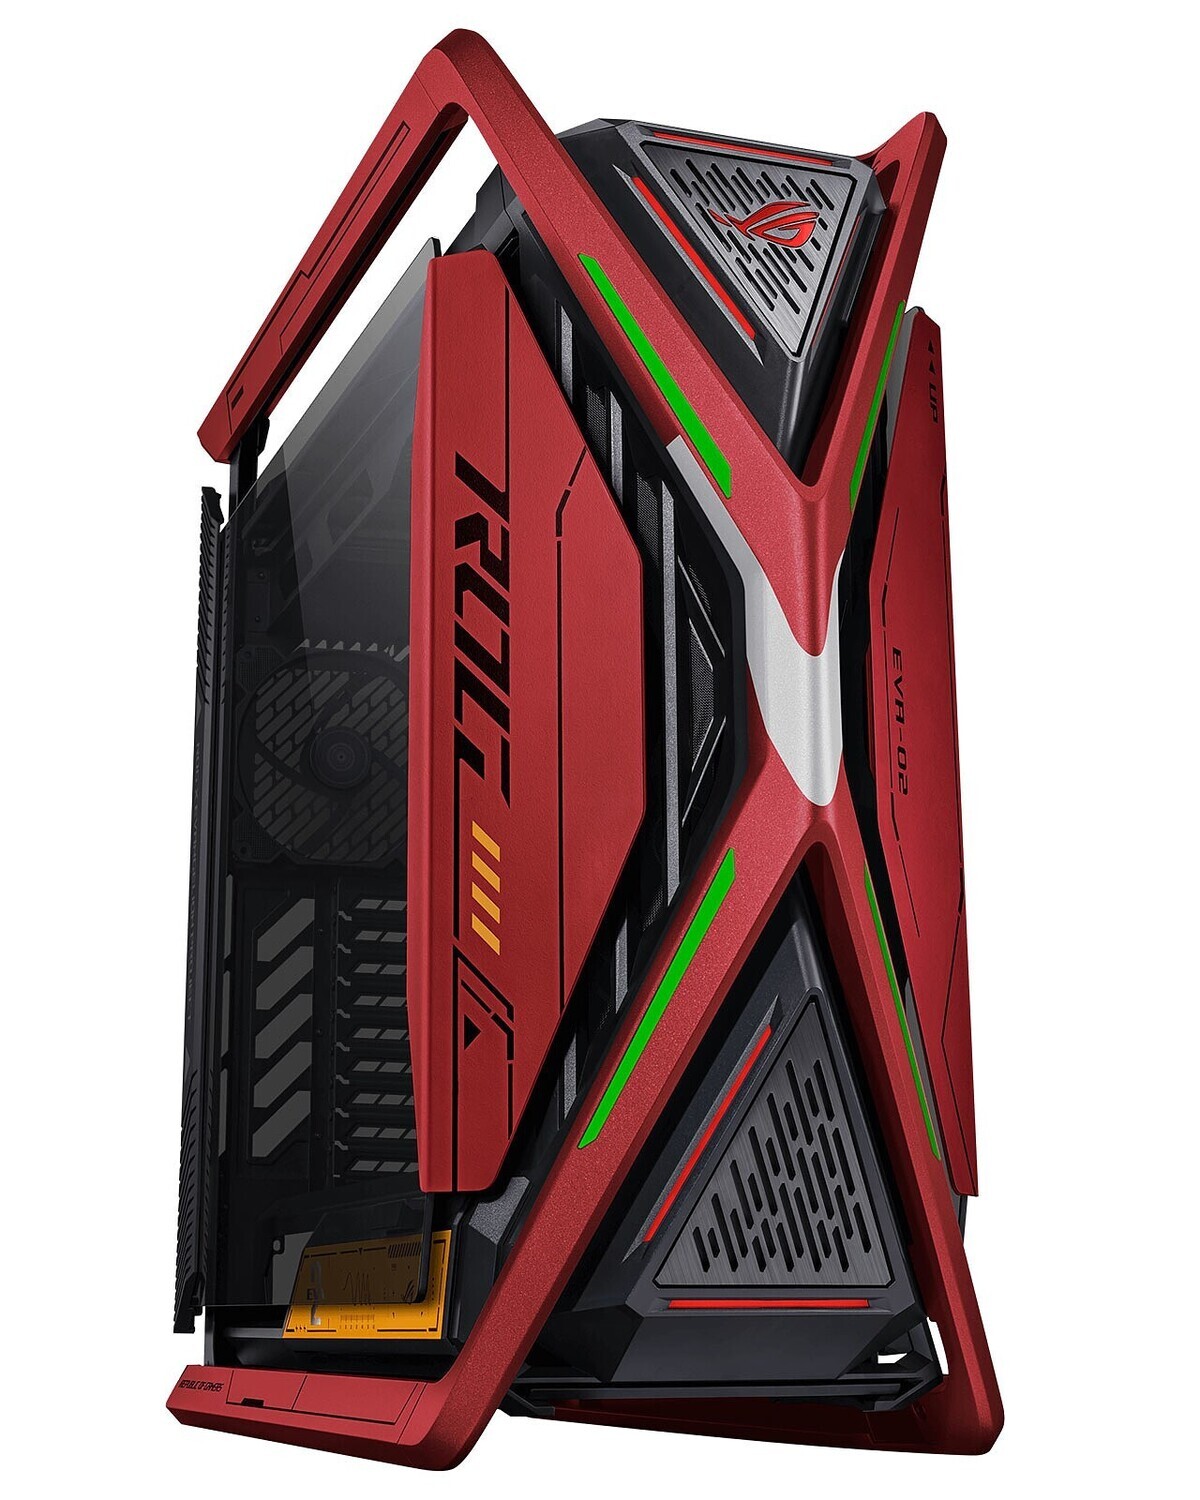 Case ASUS ROG Hyperion GR701 EVA-02 Edition, Big-Tower, Tempered Glass, red